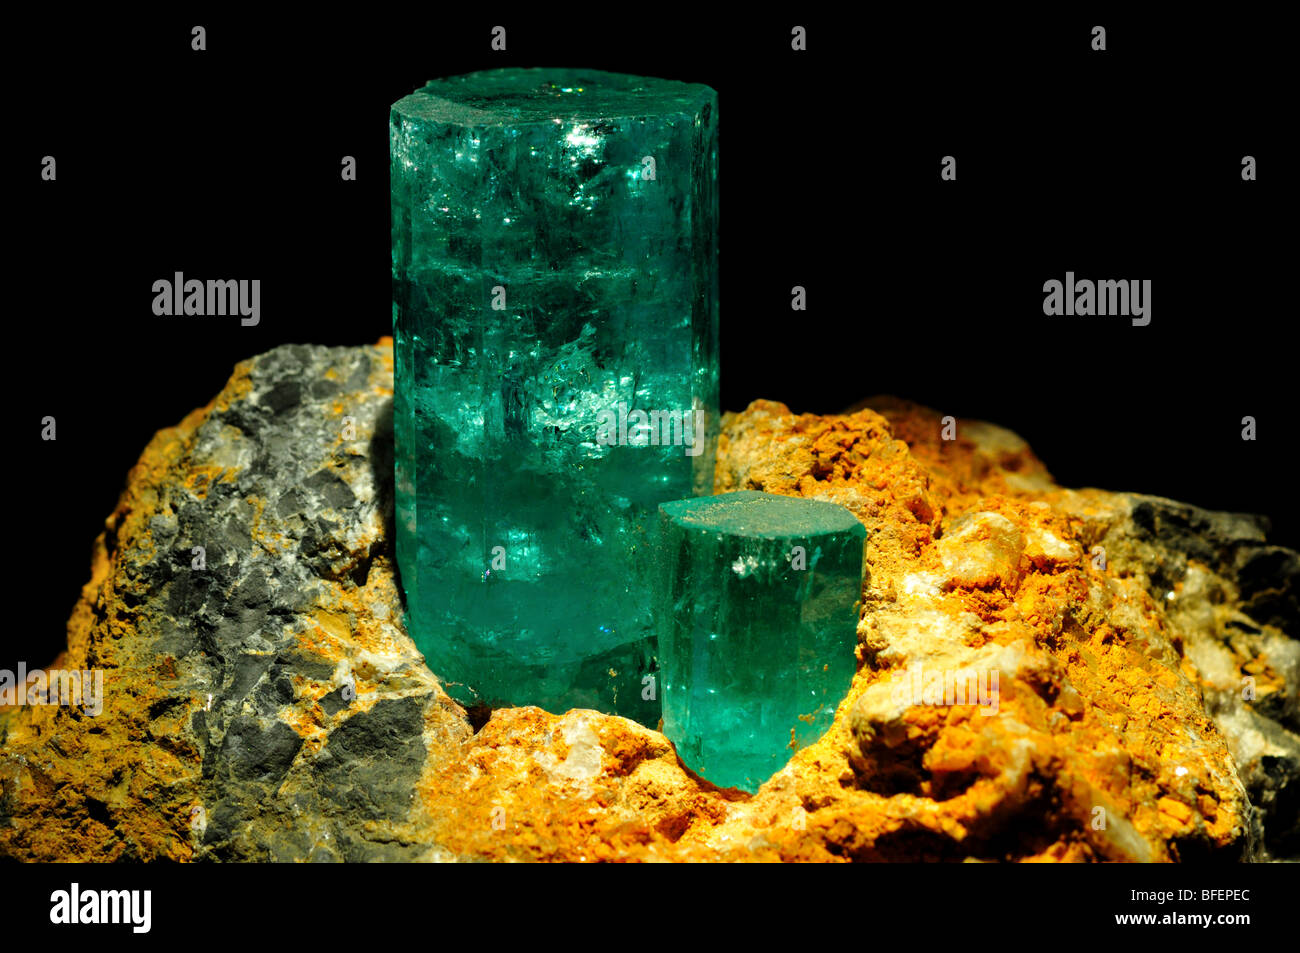 Crystals of mineral emerald, a variety of beryl. Stock Photo